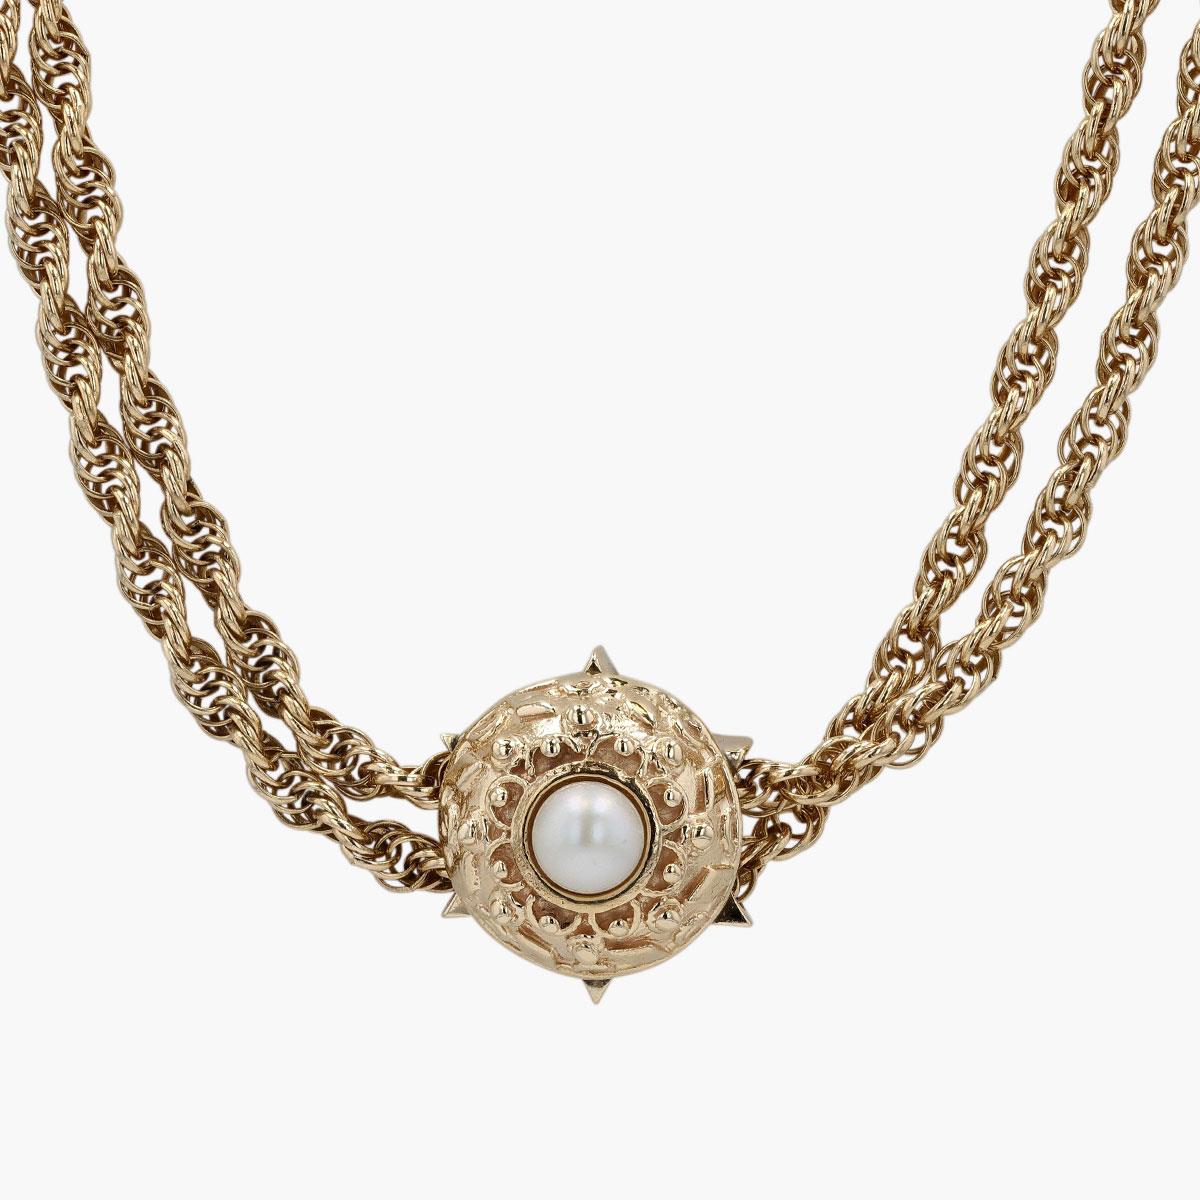 Vintage 14K Yellow Gold Rope Chain With Pearl Slide